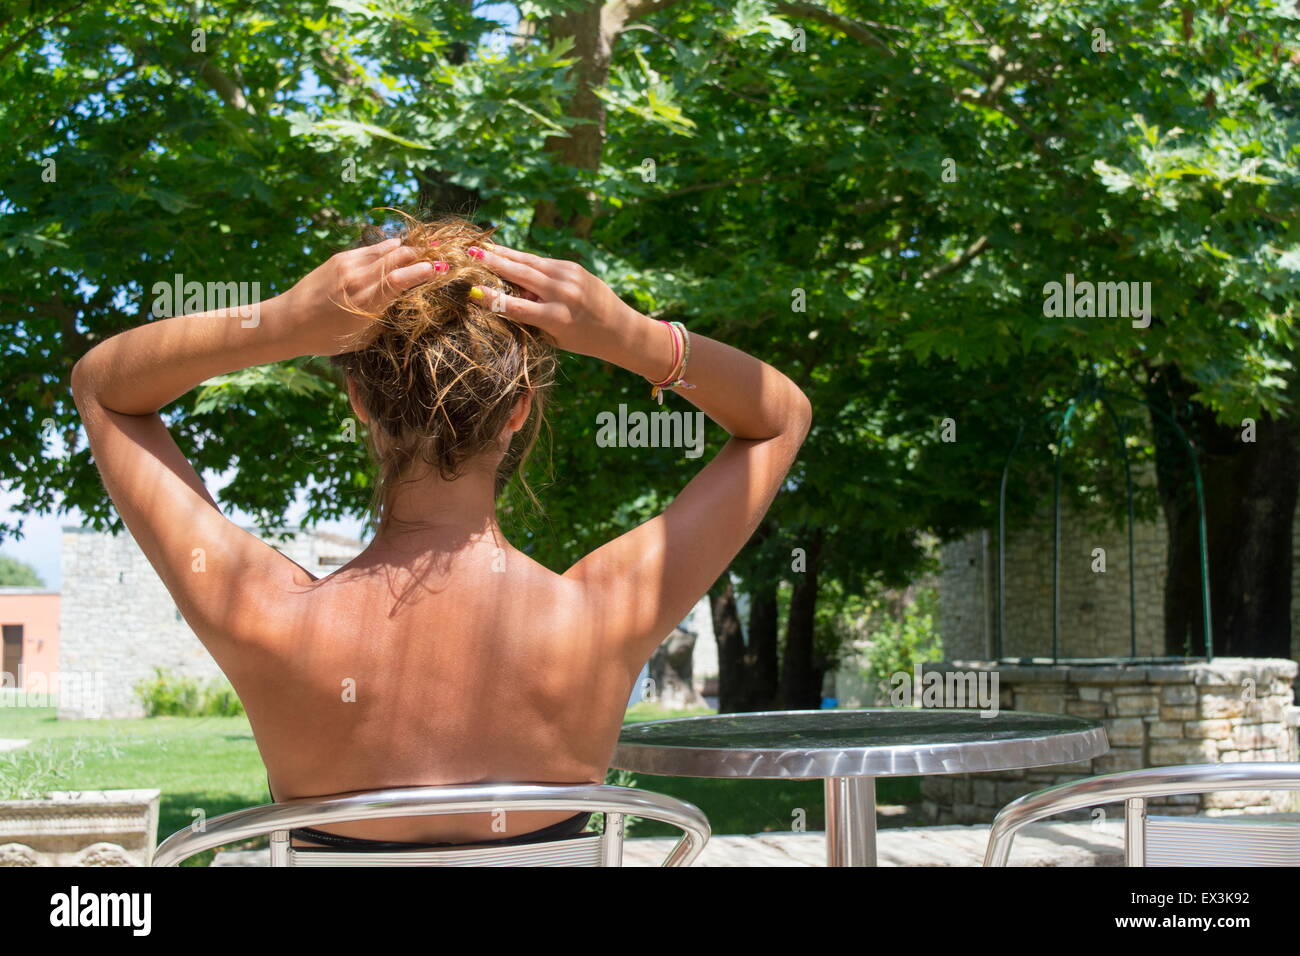 Young Tanned Girl Sitting In A Beautiful Backyard Wearing Bikini With Her Hair Lifted Up Stock Photo Alamy